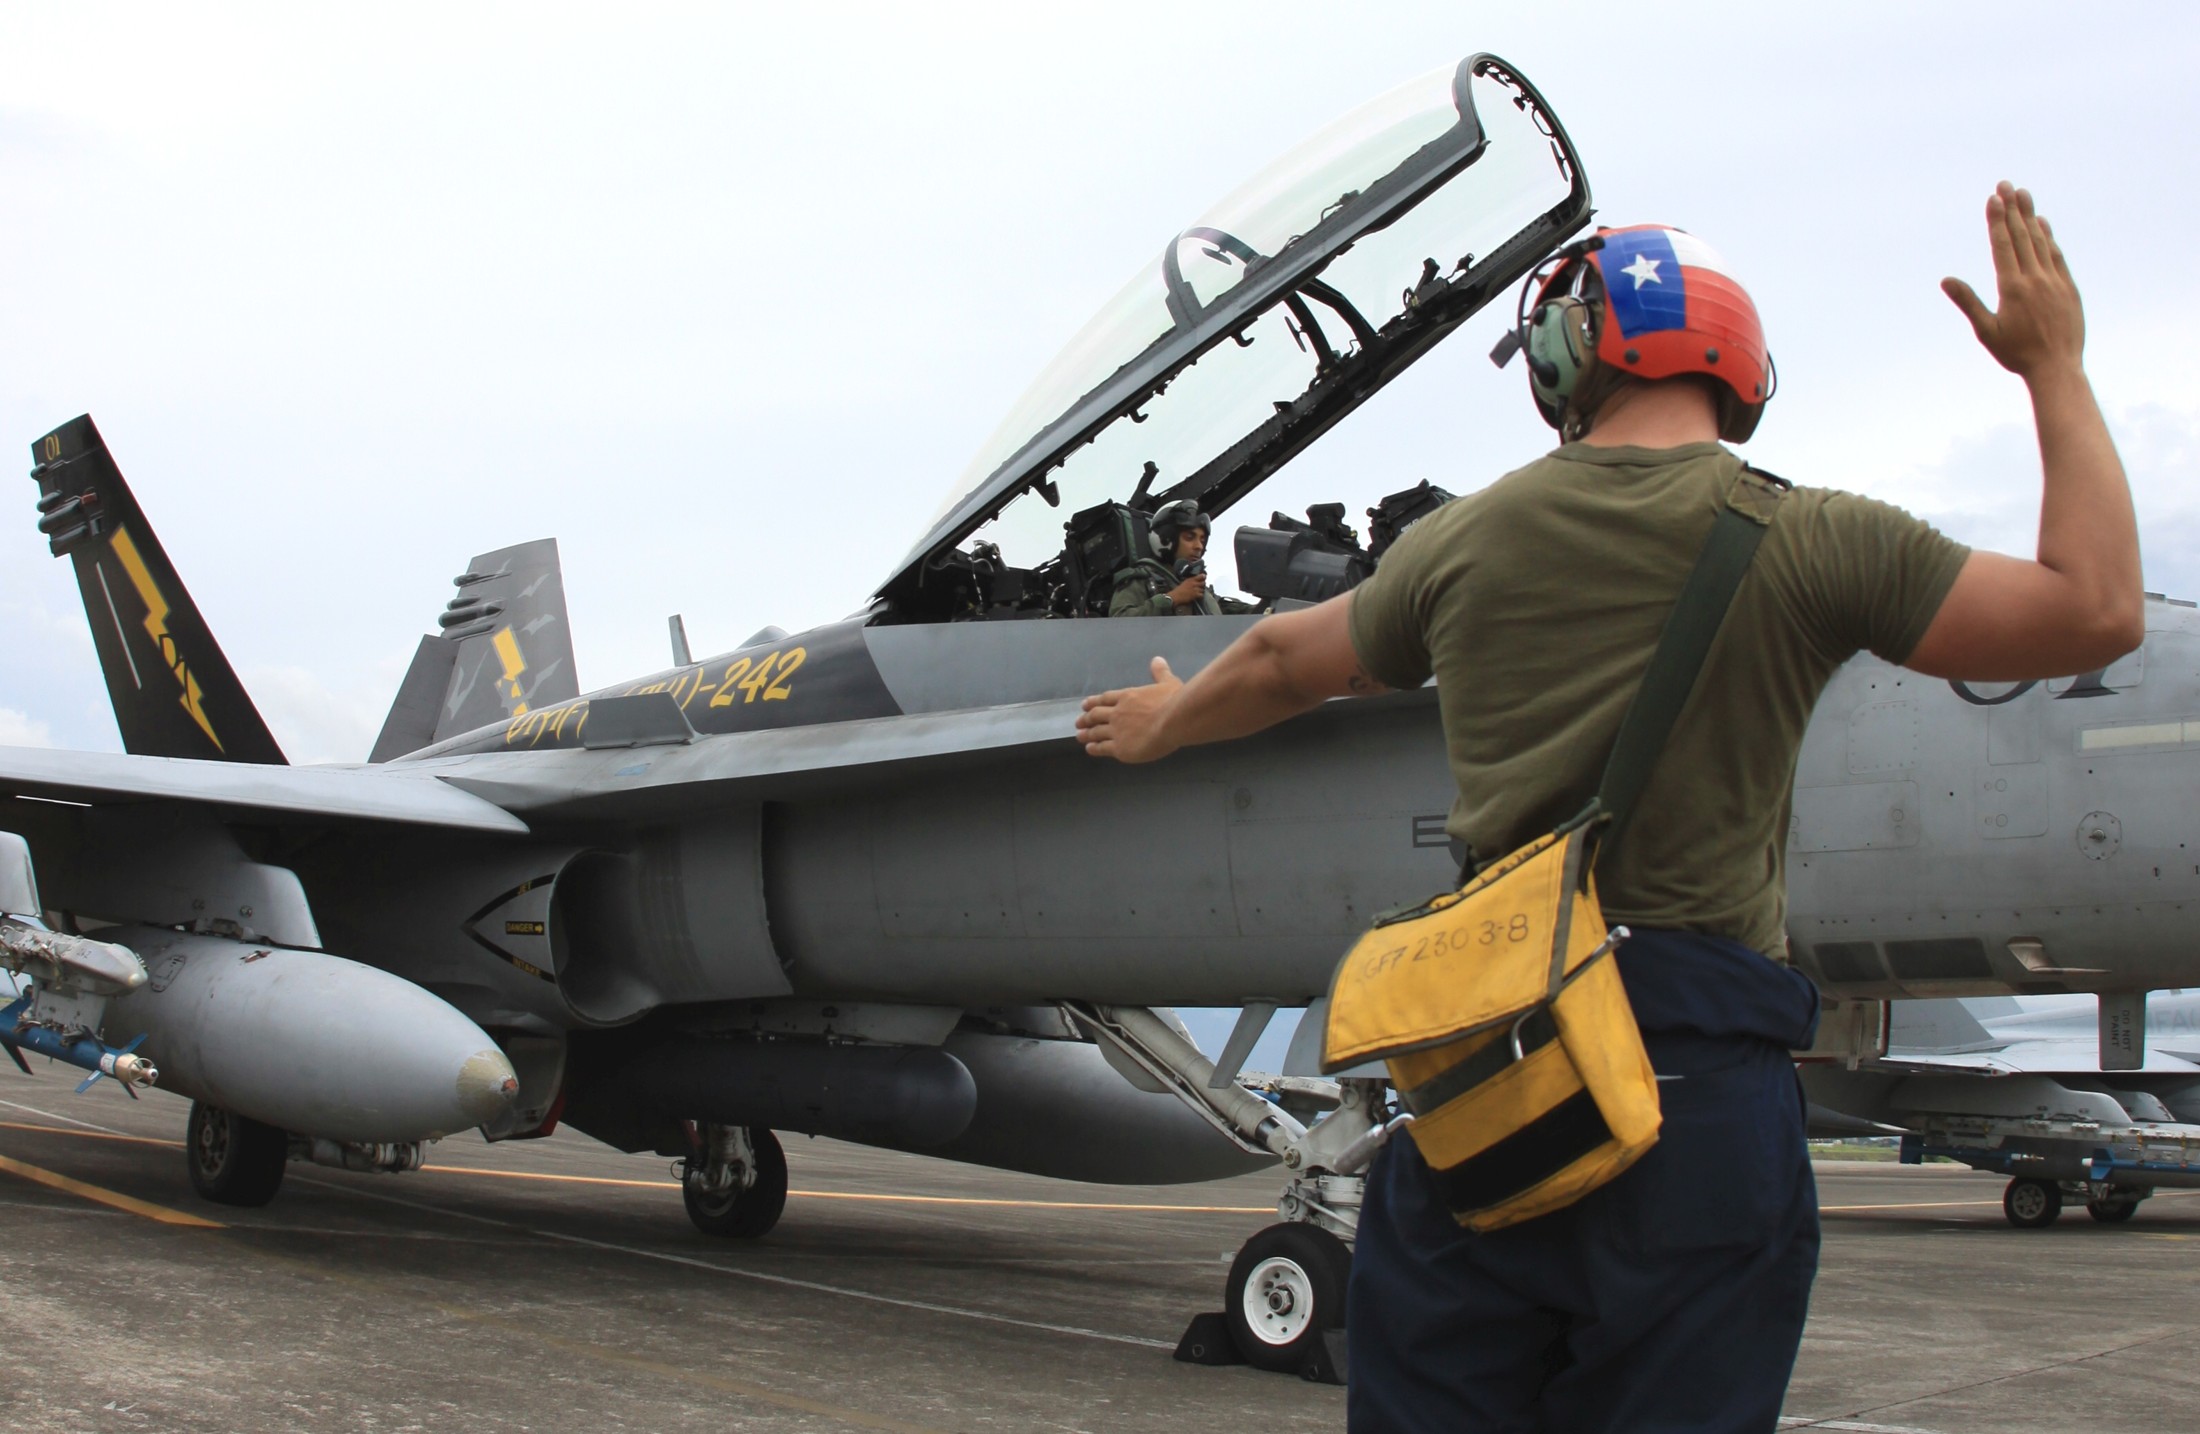 vmfa(aw)-242 bats marine all-weather fighter attack squadron usmc f/a-18d hornet 33 clark philippines